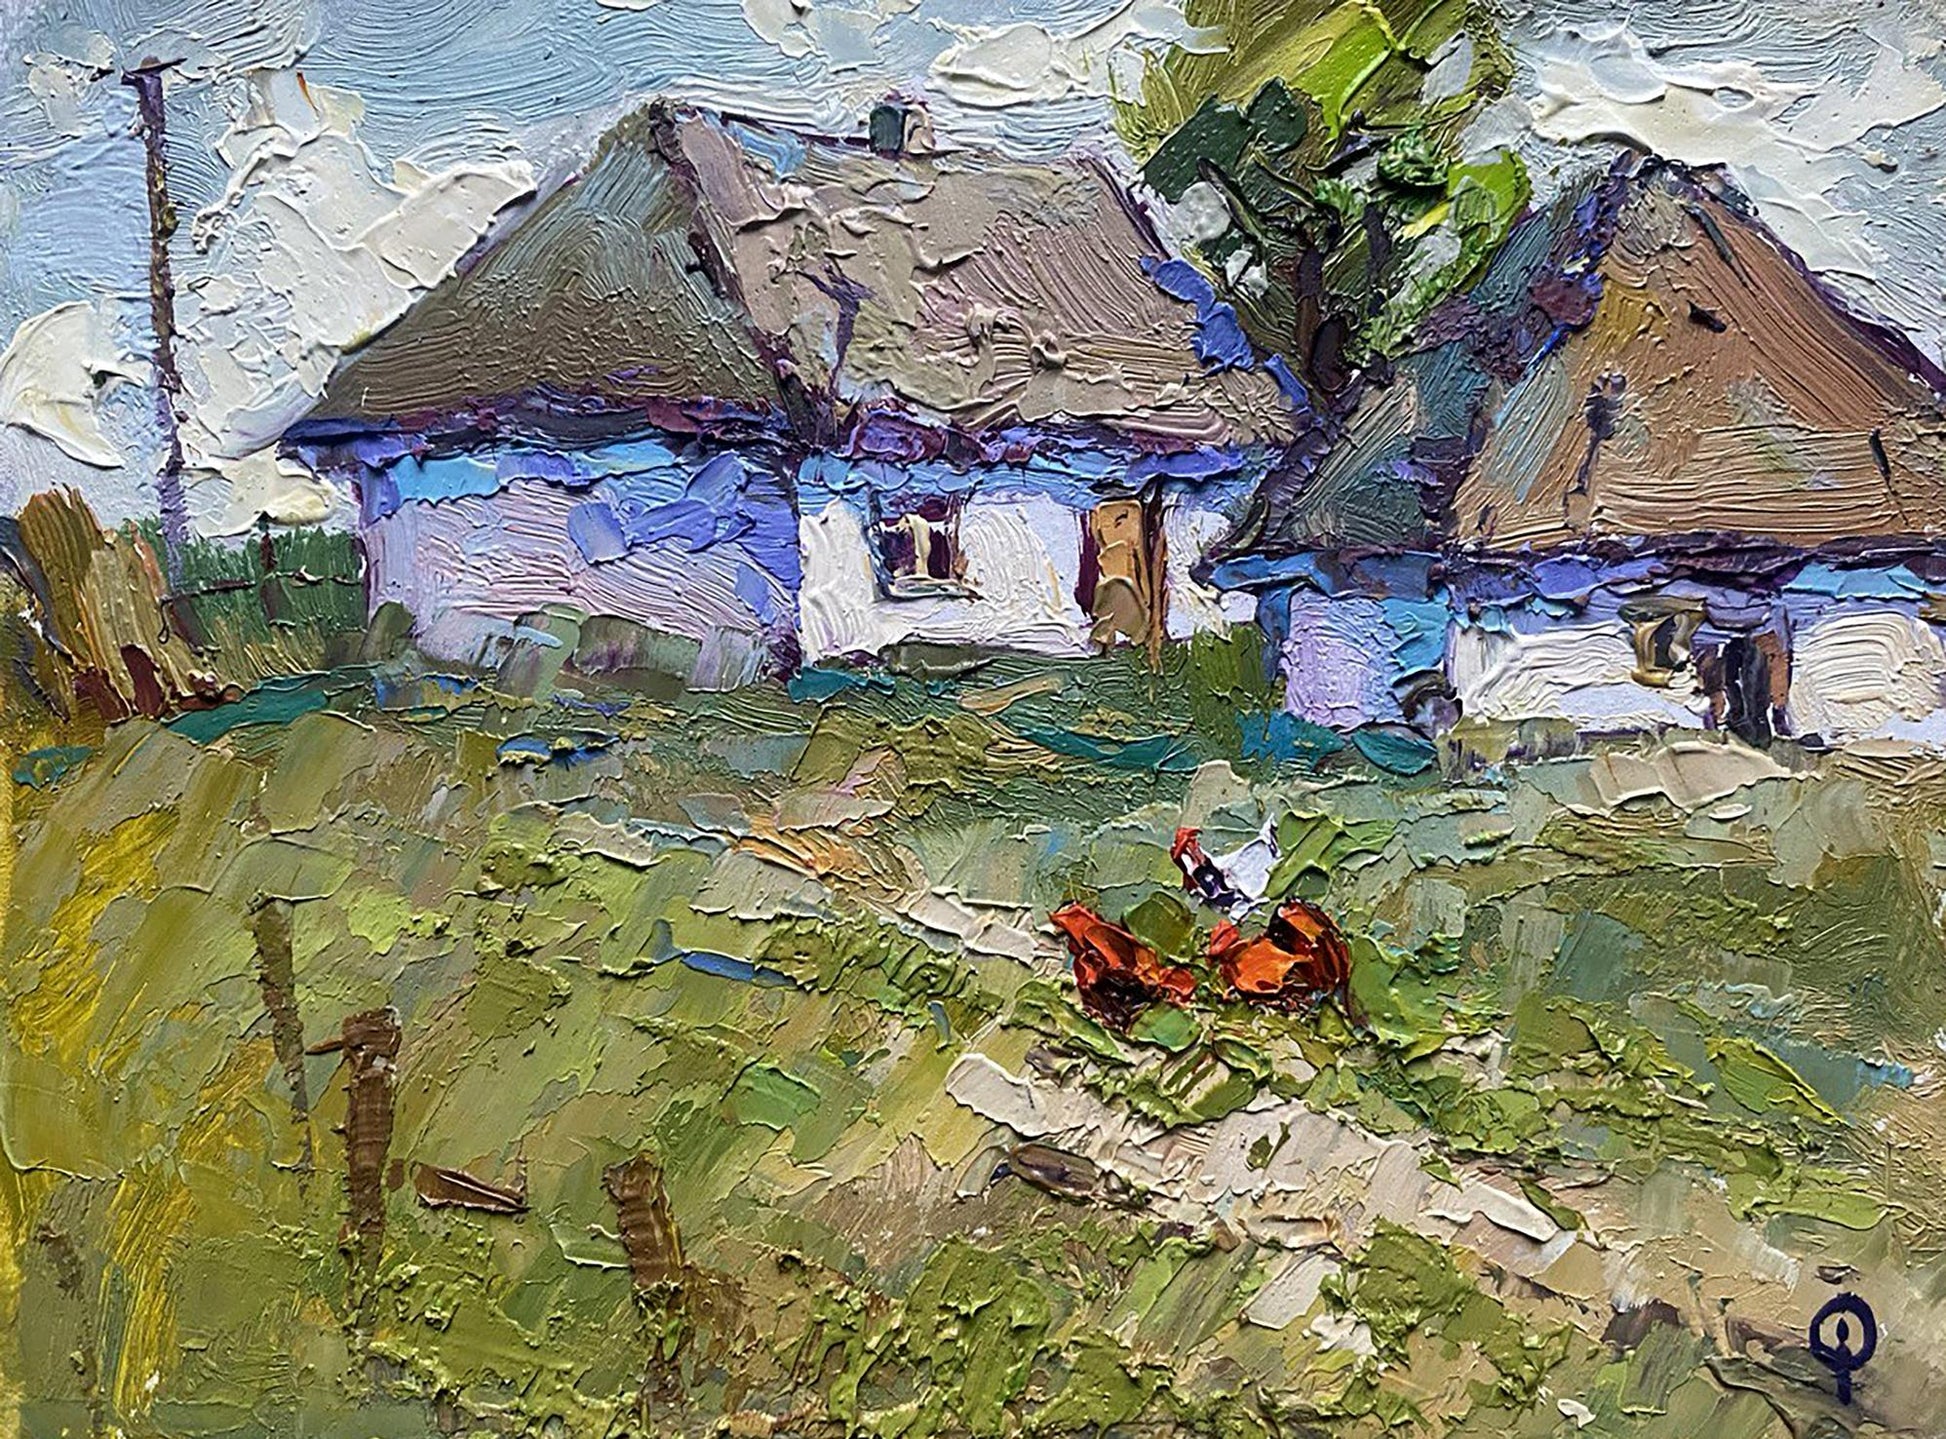 Oil painting Village Home and yard